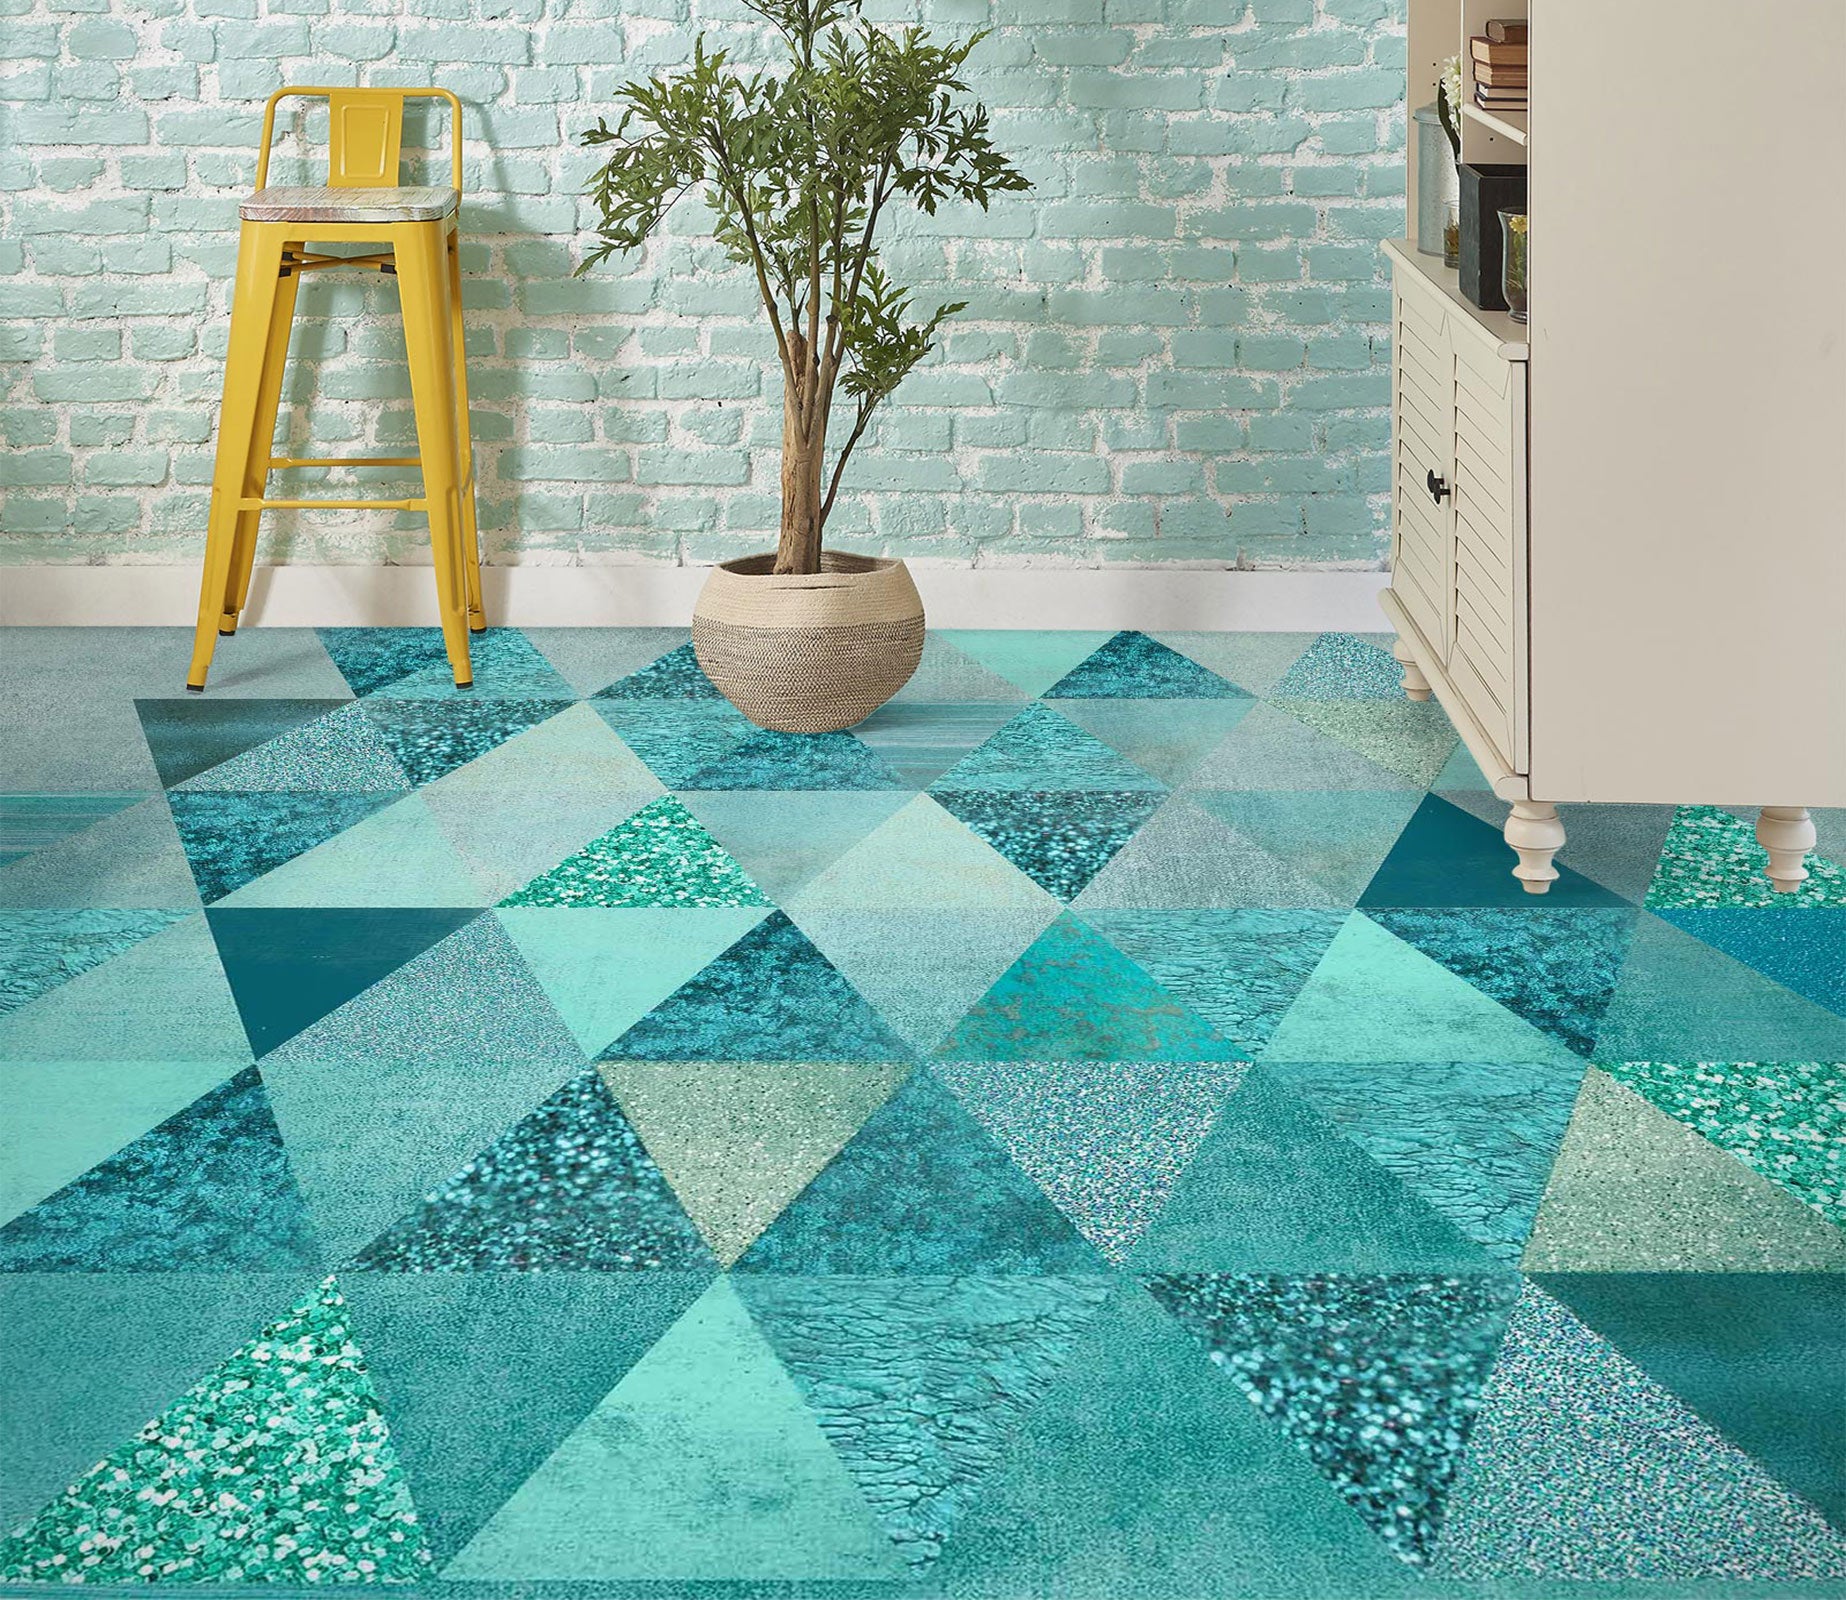 3D Green Triangle Pattern 102117 Andrea Haase Floor Mural  Wallpaper Murals Self-Adhesive Removable Print Epoxy